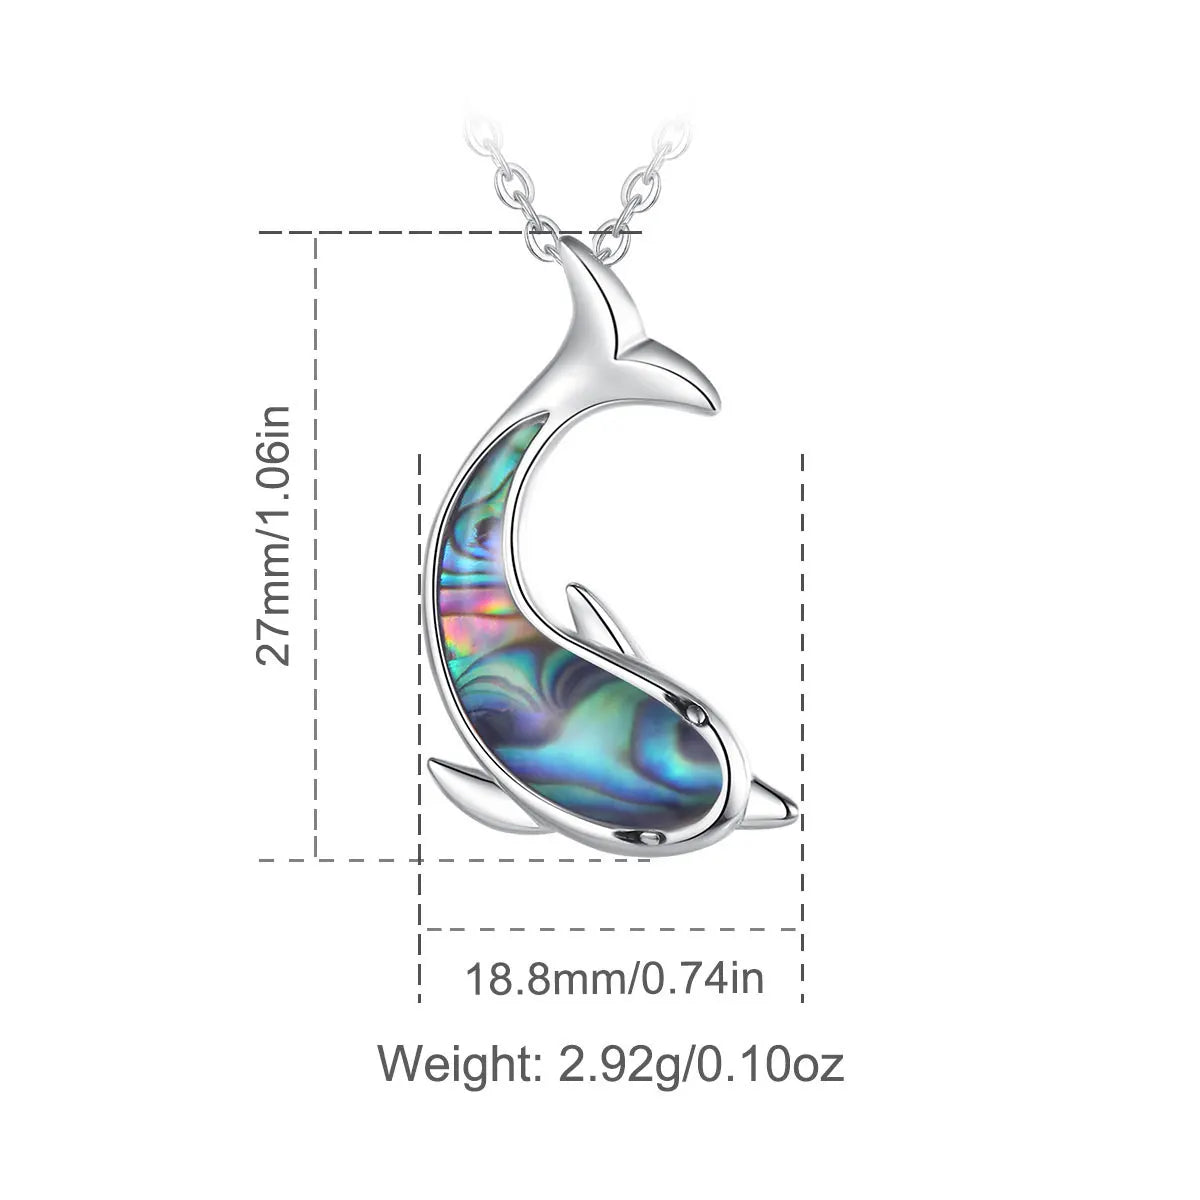 Genuine 925 Sterling Silver Colorful Whale & Dolphin Necklace